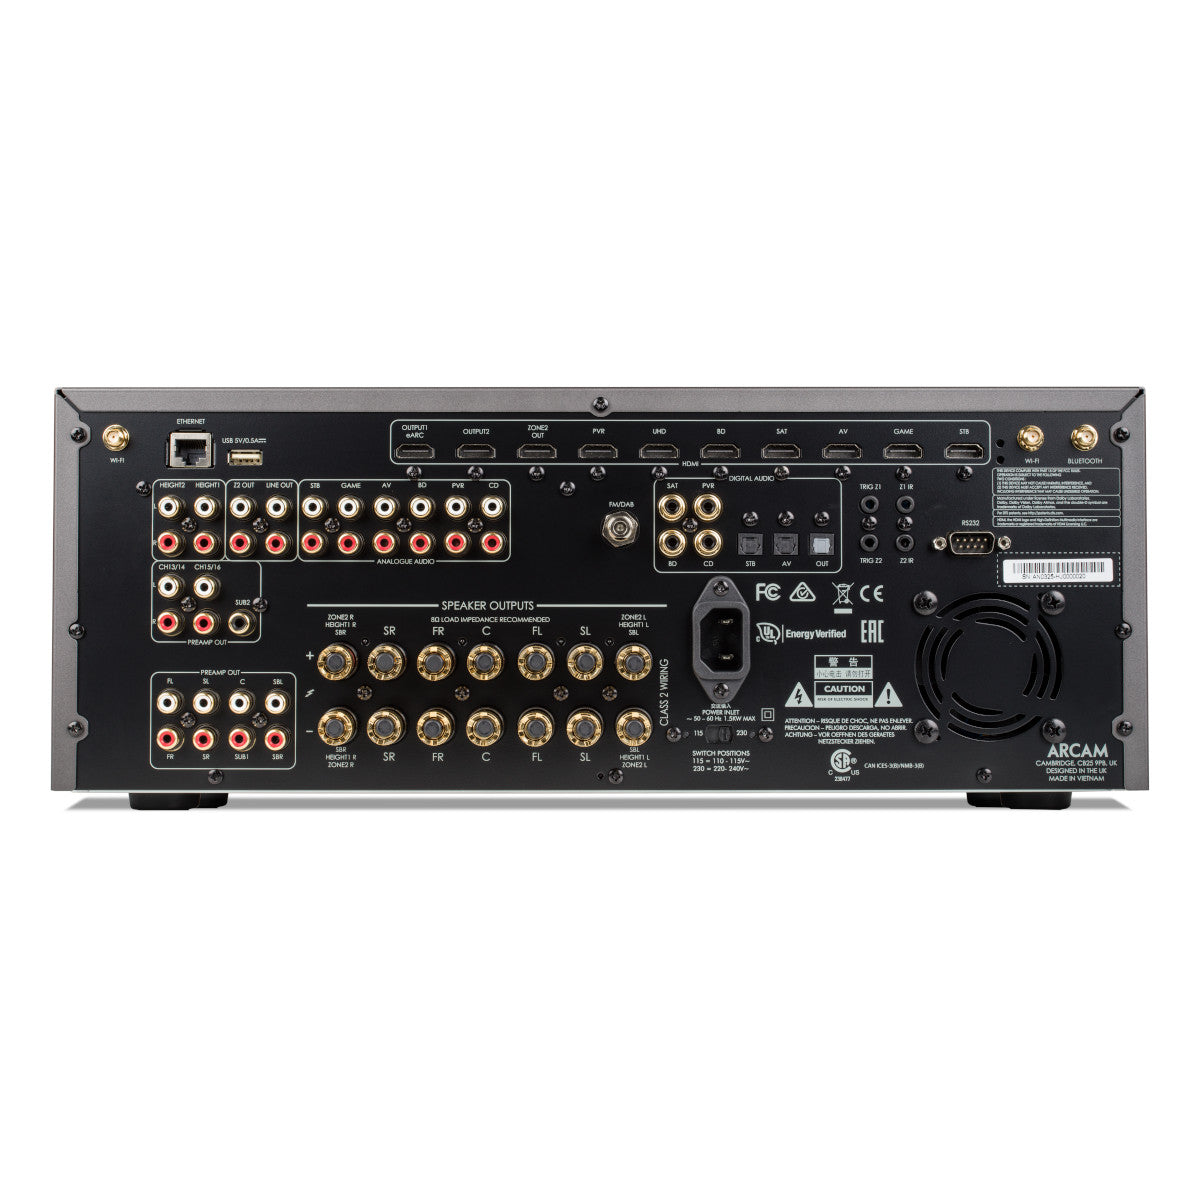 Arcam AVR30 Class G 7.2-Channel Home Theater Receiver with Dolby Atmos & DTS:X 9.1.6 decoding